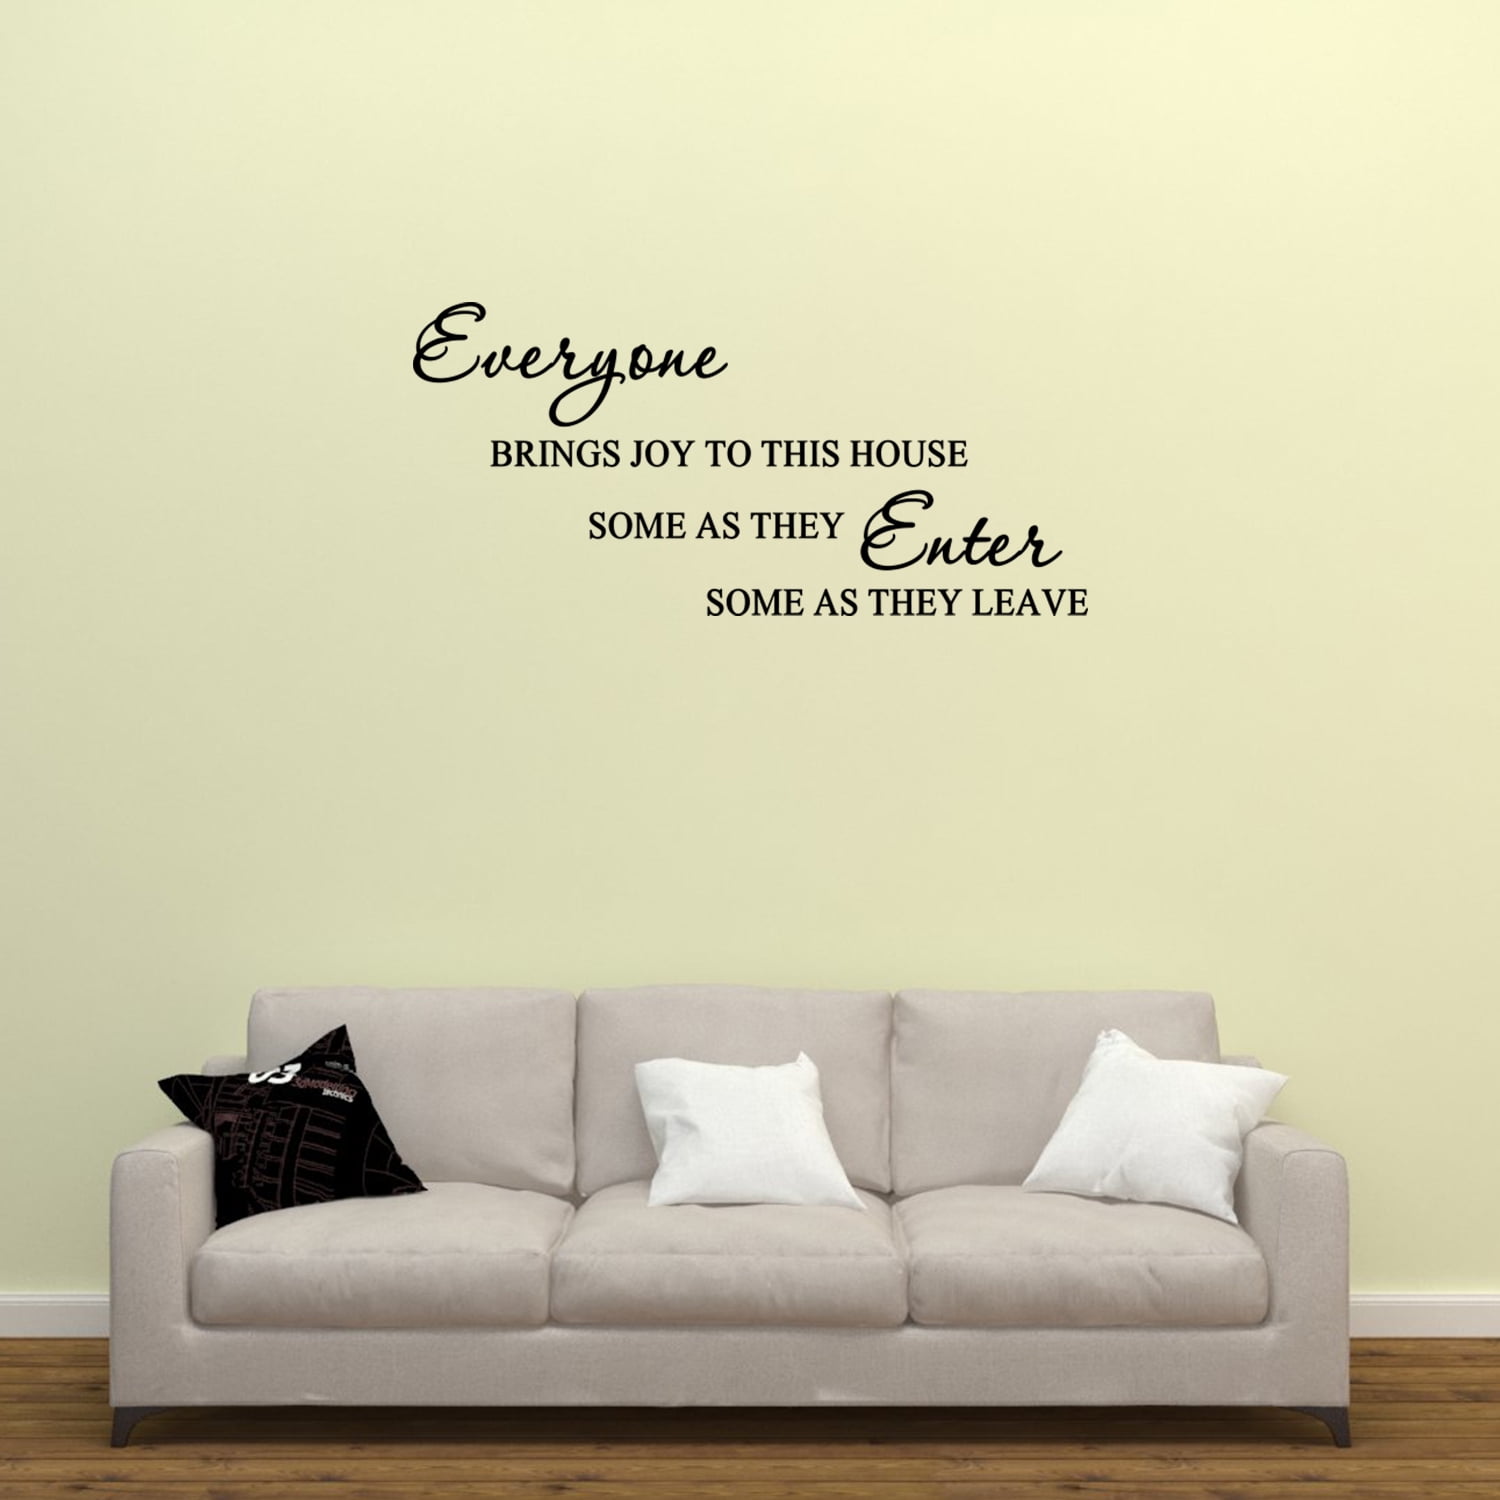 Everyone Brings Joy Wall Sticker Home Quotes Inspirational Love MS066VC 